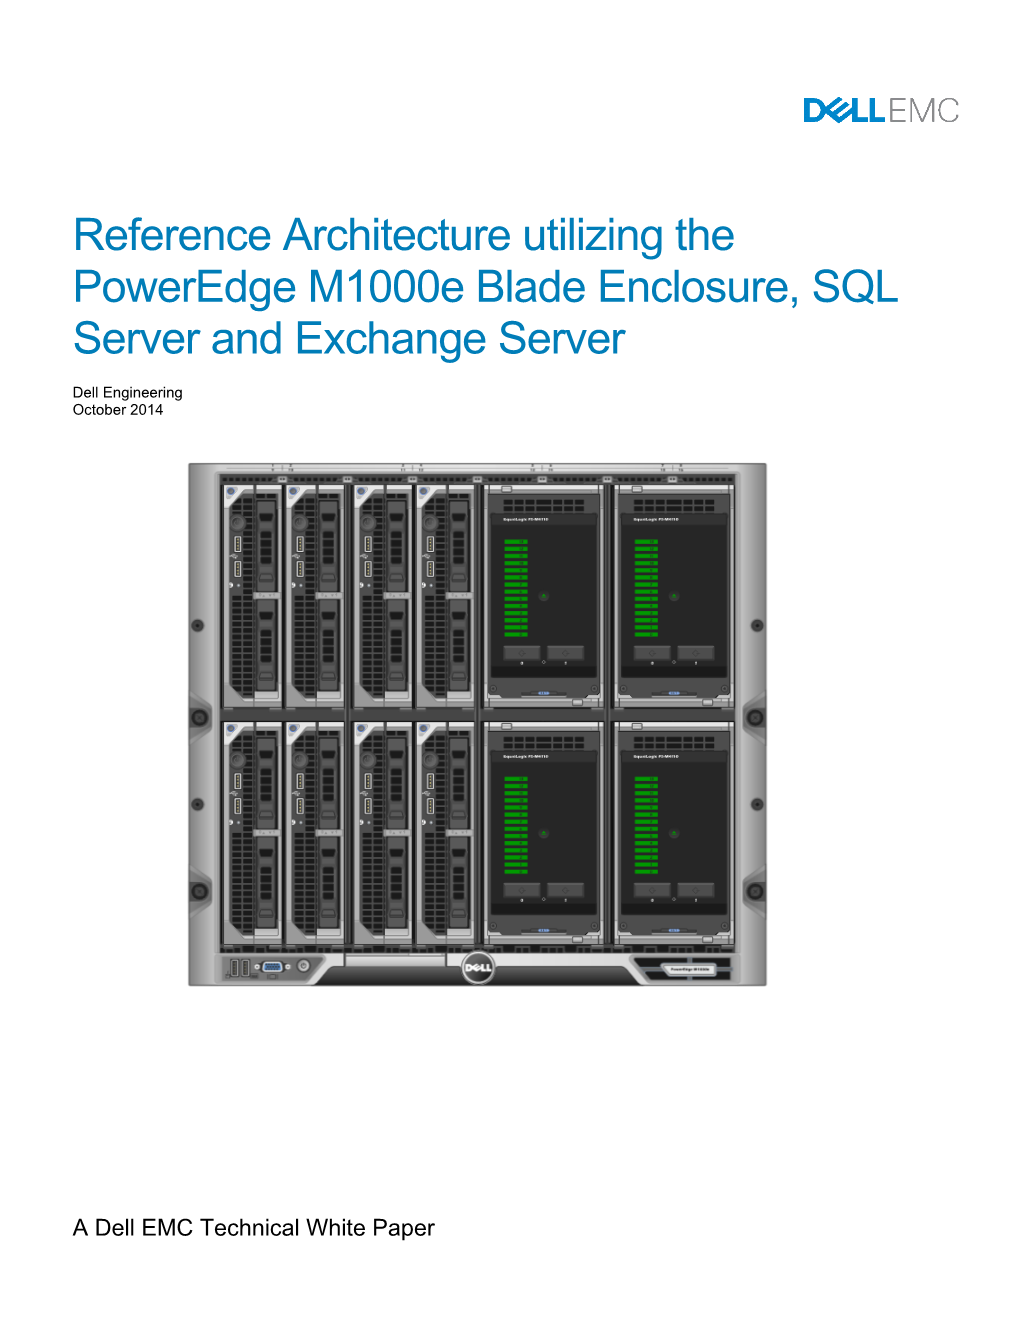 Reference Architecture Utilizing the Poweredge M1000e Blade Enclosure, SQL Server and Exchange Server